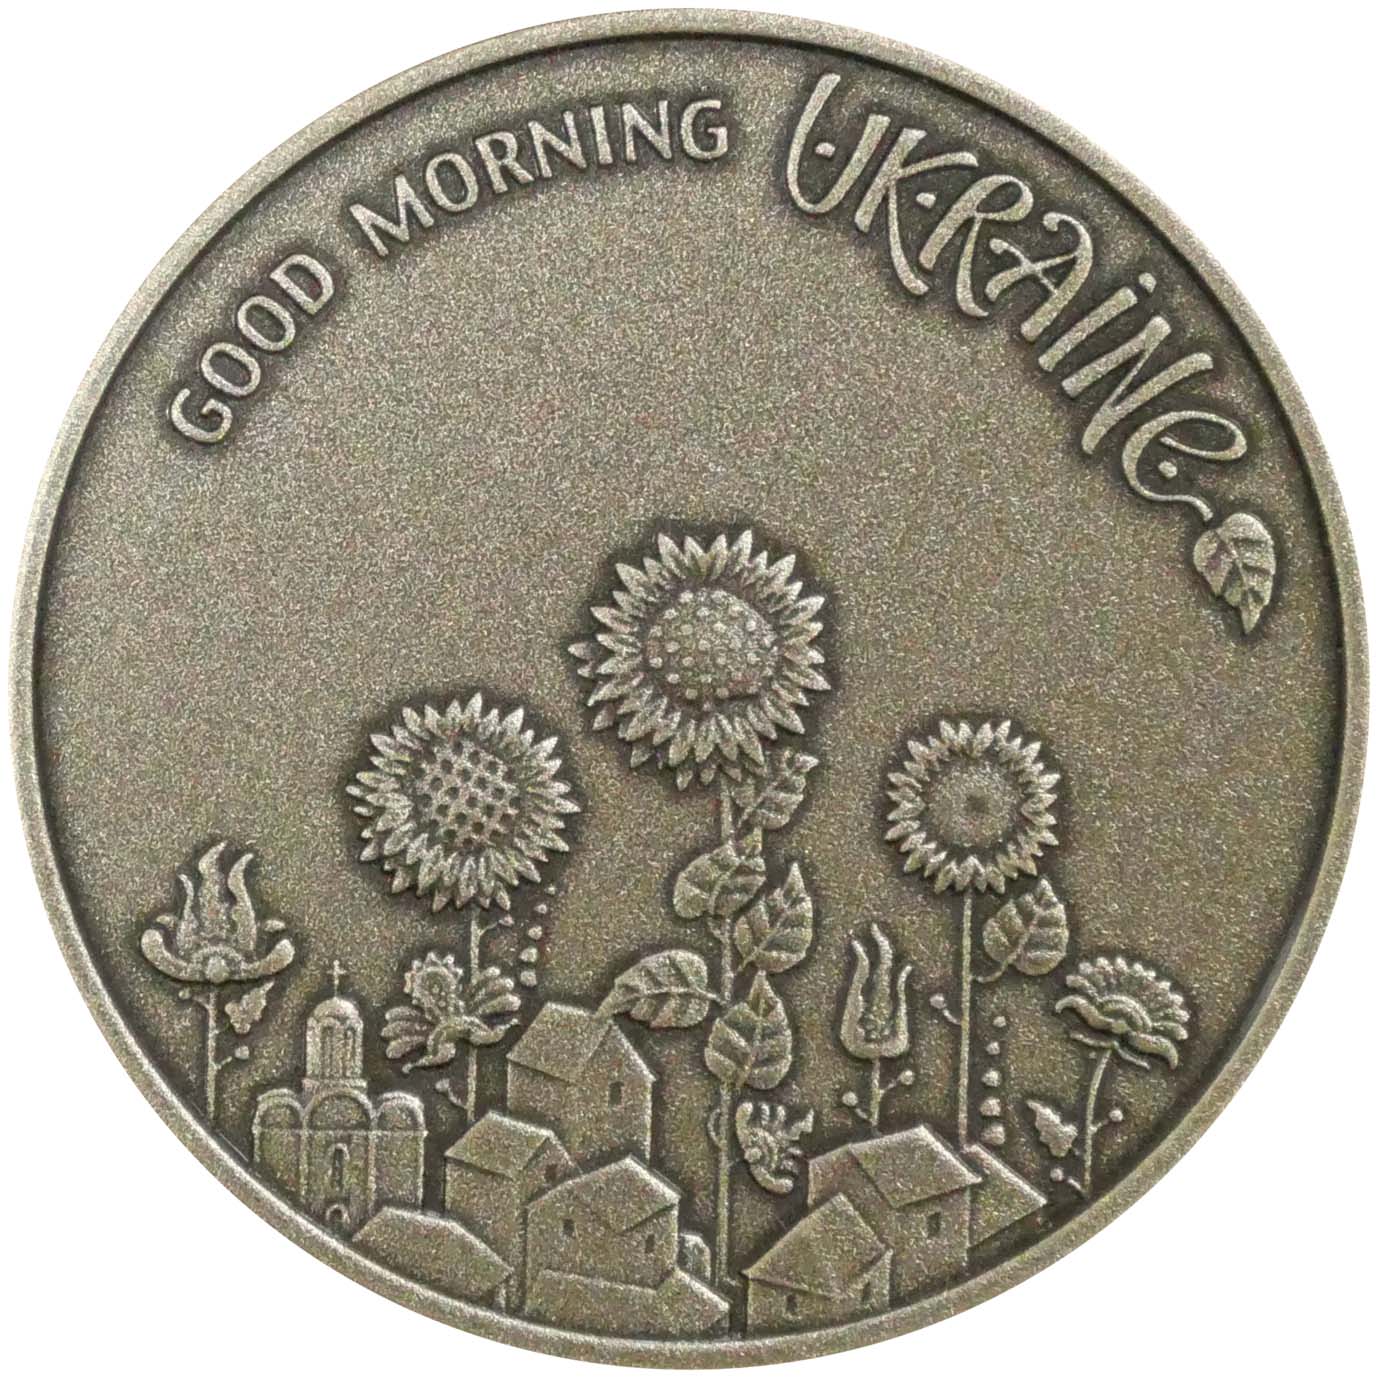 Image of International Coin Design Competition 2022 Most Excellent Work Silver Medal Reverse